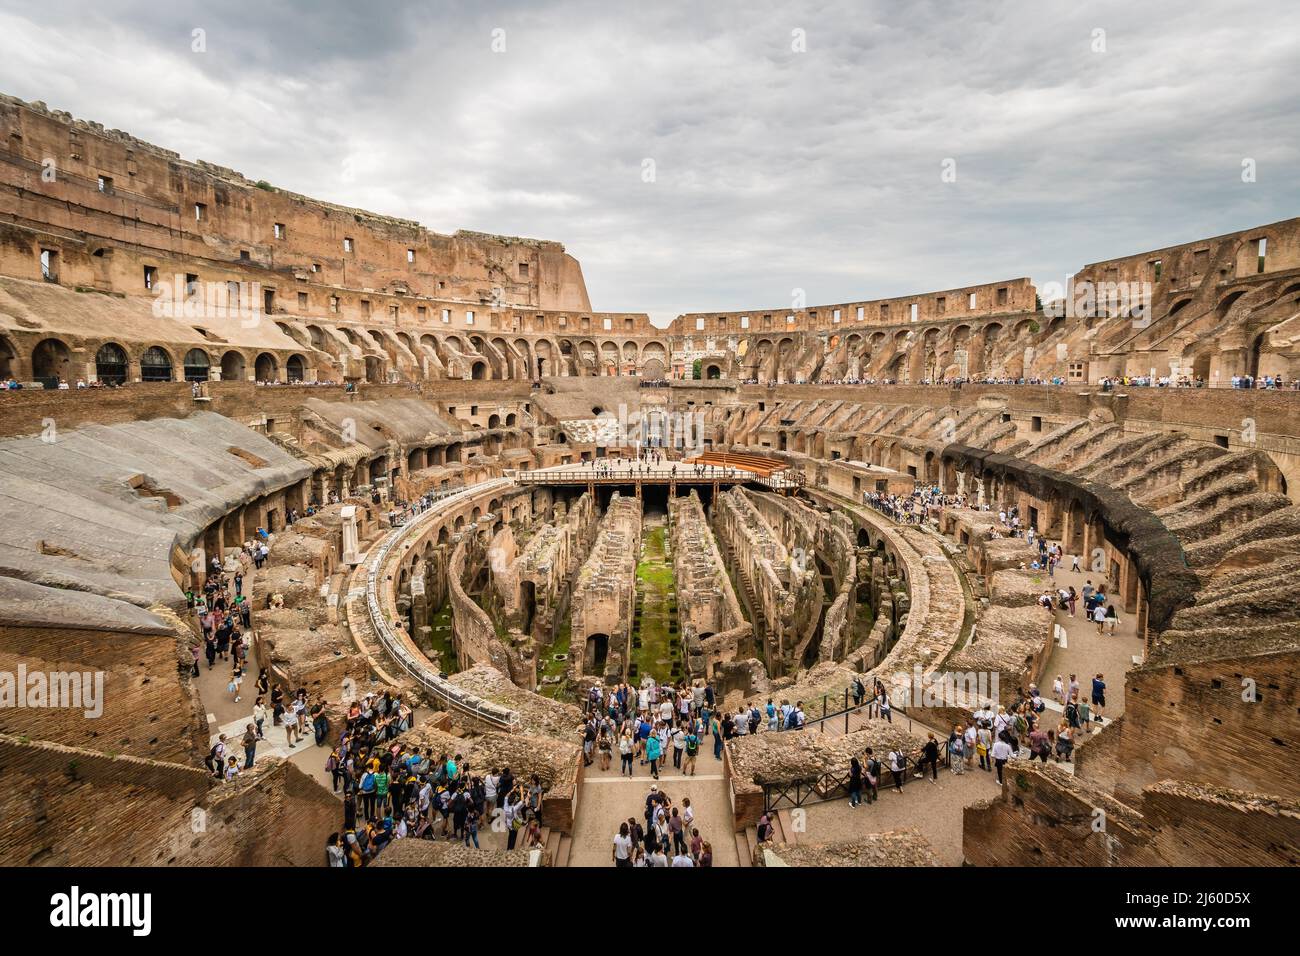 Grand View of the Roman Colosseum at Day under Cloudy Skies in City of Rome, Italy 01 Stock Photo